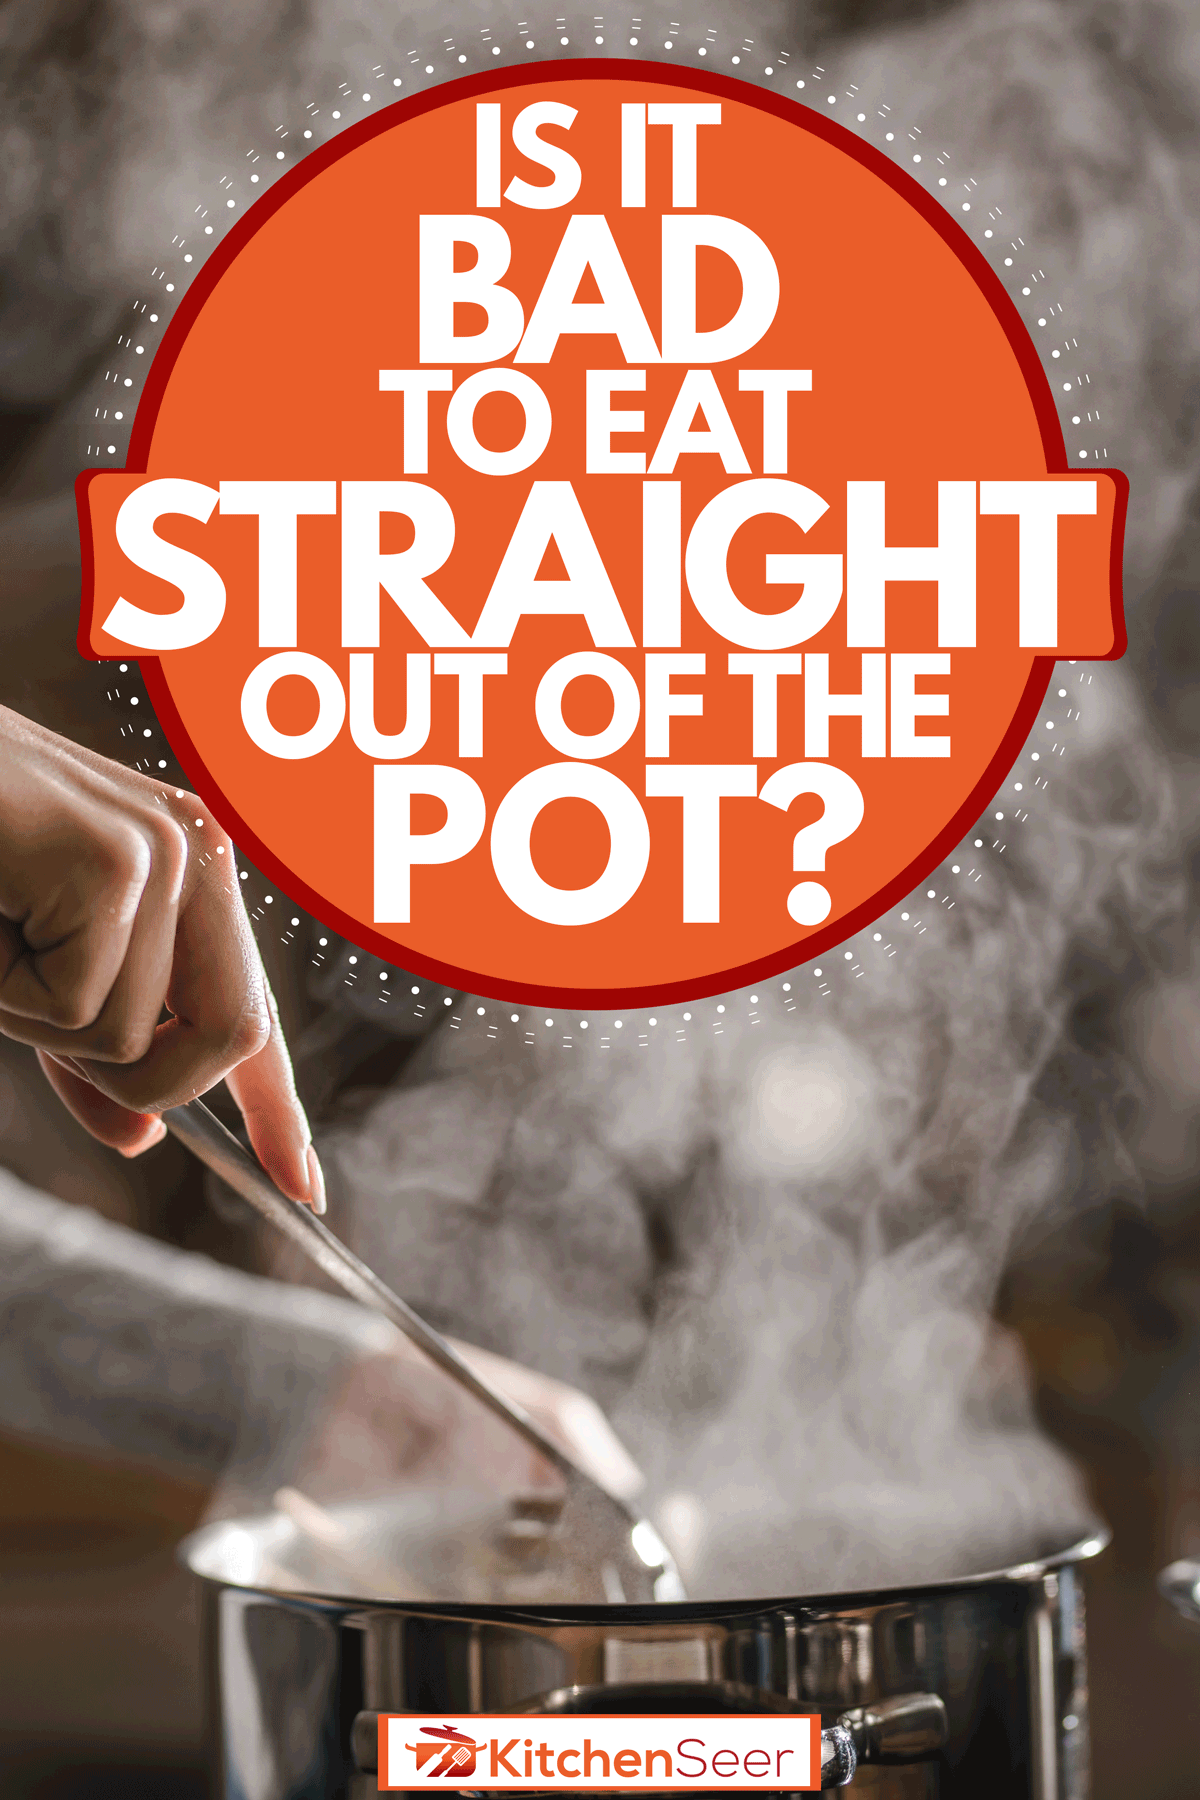 A woman holding a spatula and stirring her cooking on a pot, with steam rising from the pot, Is It Bad To Eat Straight Out Of The Pot?